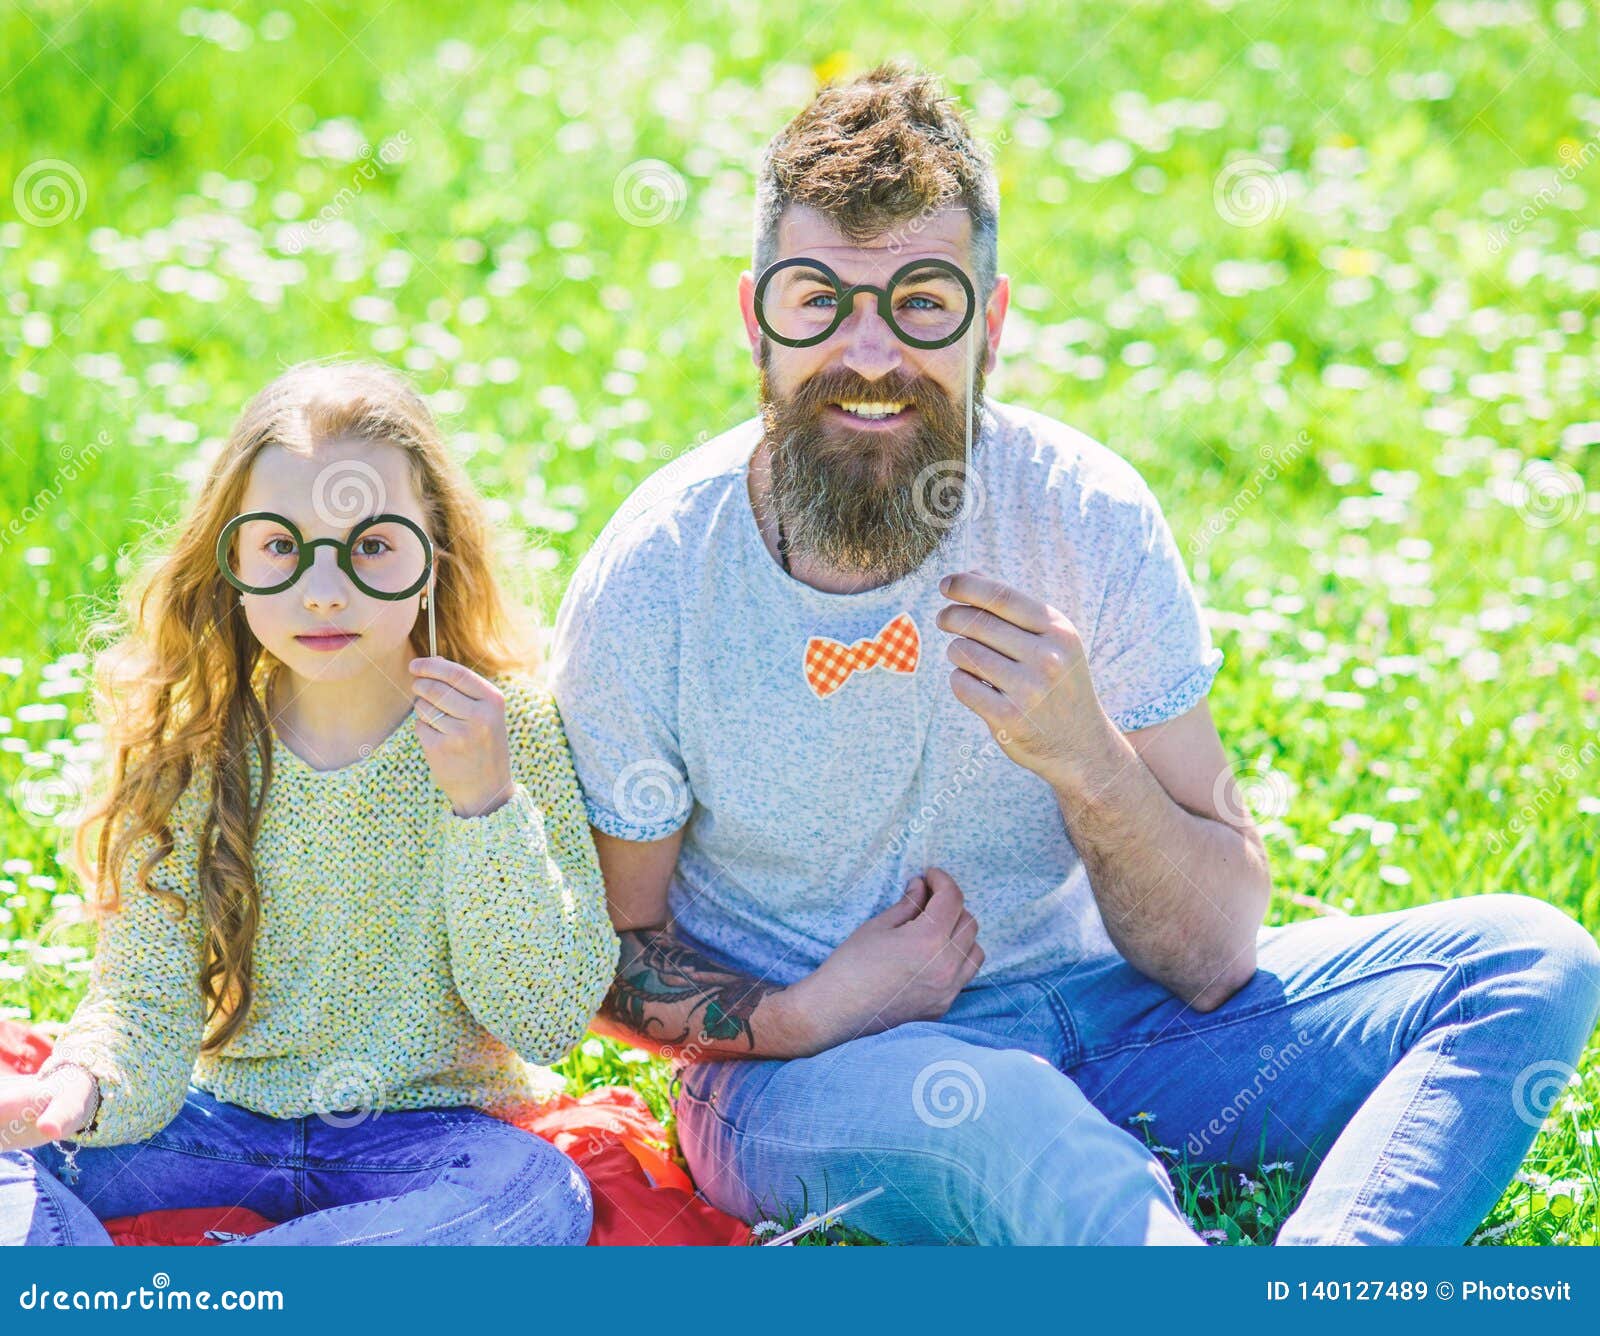 dad and daughter sits on grass at grassplot, green background. child and father posing with eyeglases photo booth